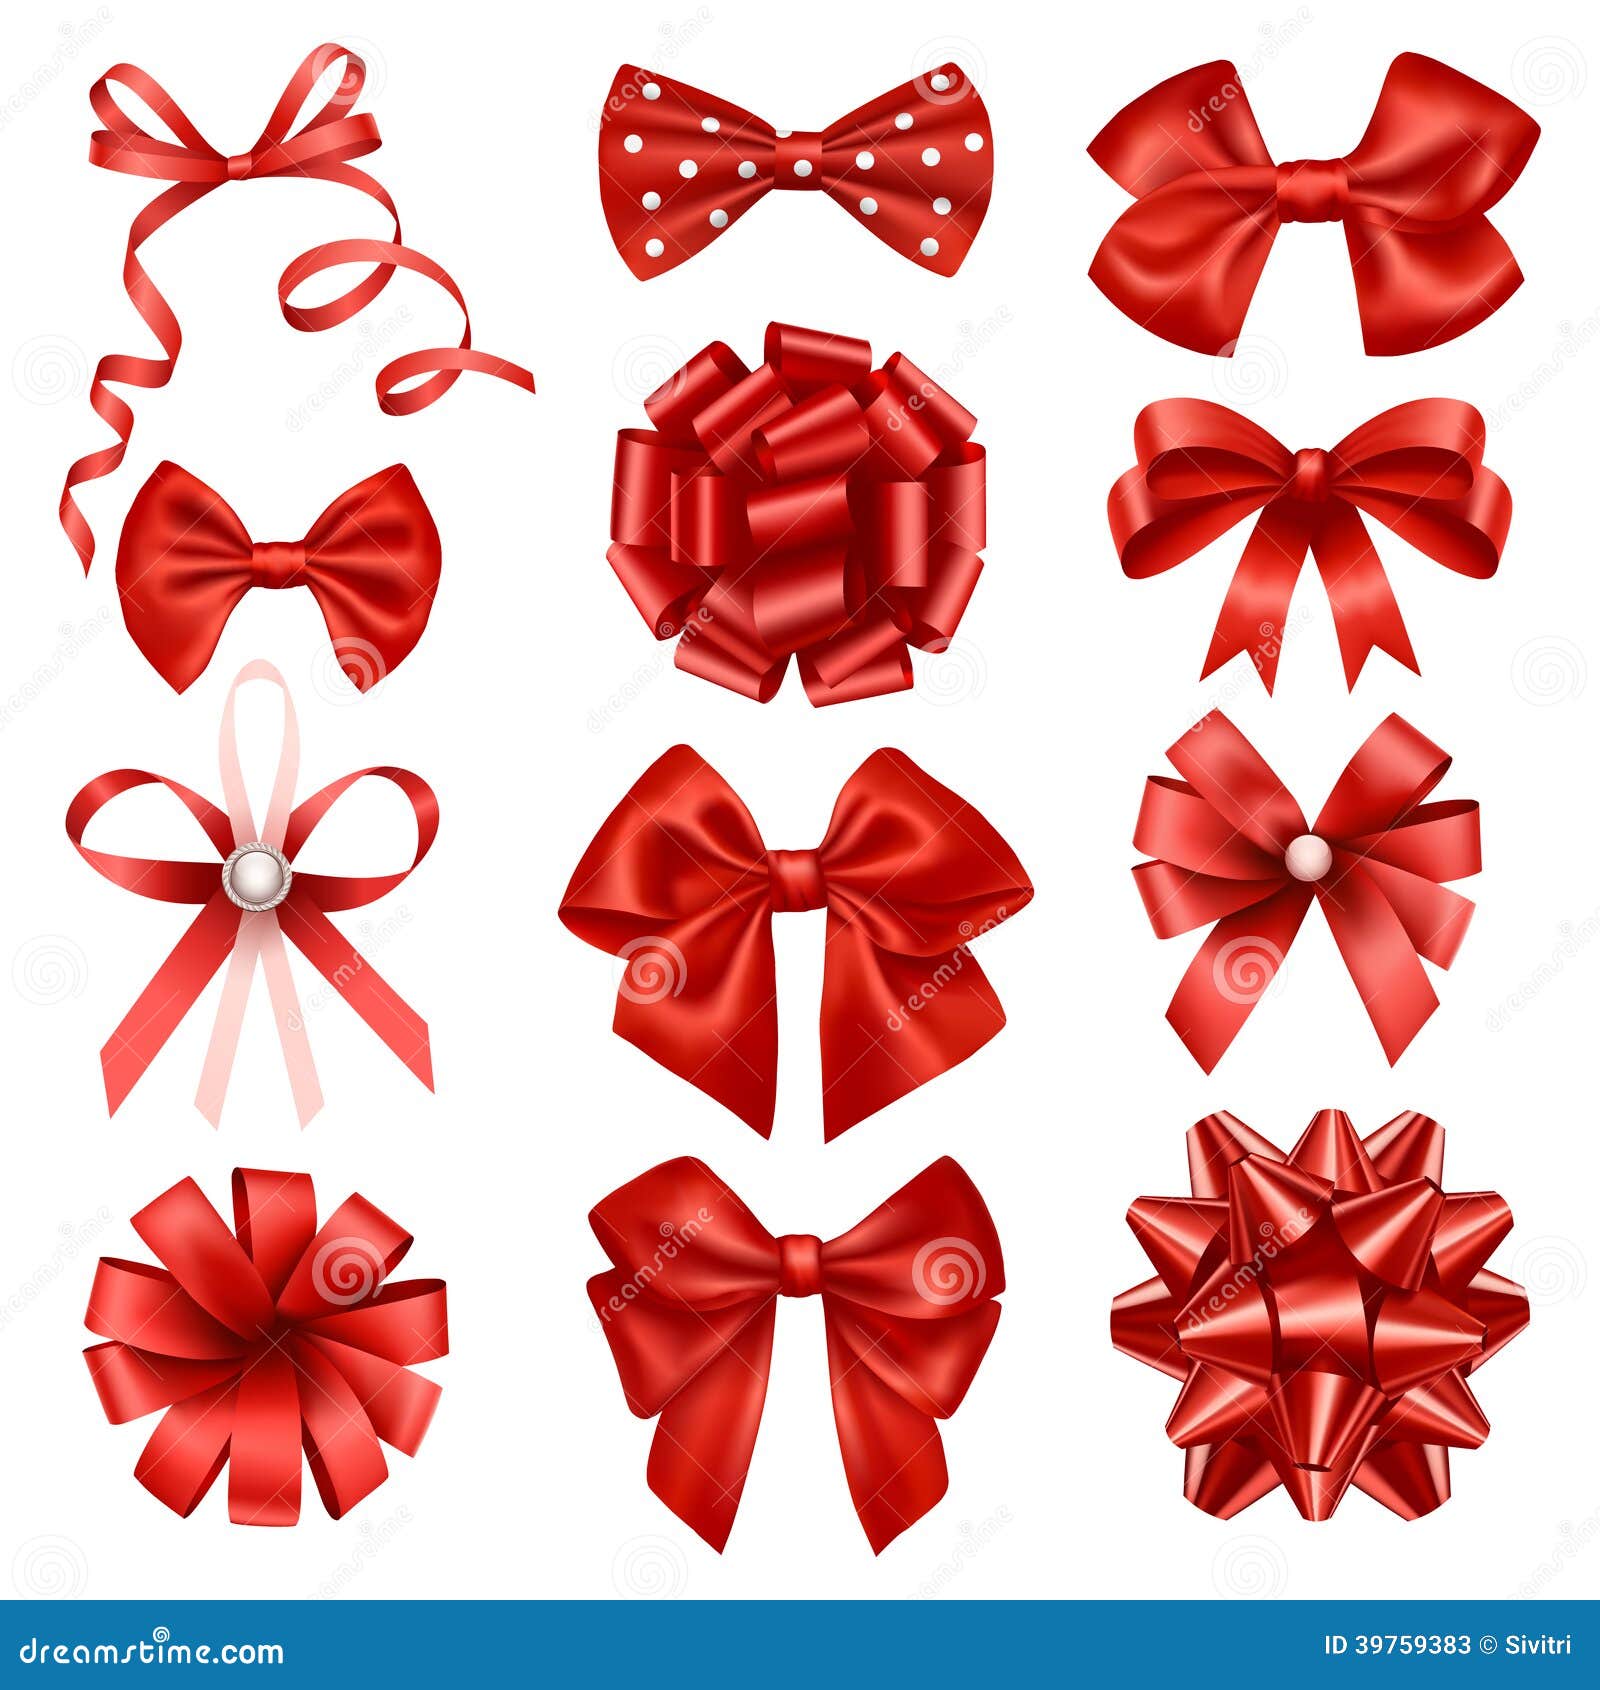 Red Bows Set Graphic Elements In Flat Design Bundle Of Different Types Of  Decorative Silk Or Satin Bows For Gifts Wrapping Invitation And Decorating  Presents Vector Illustration Isolated Objects Stock Illustration 